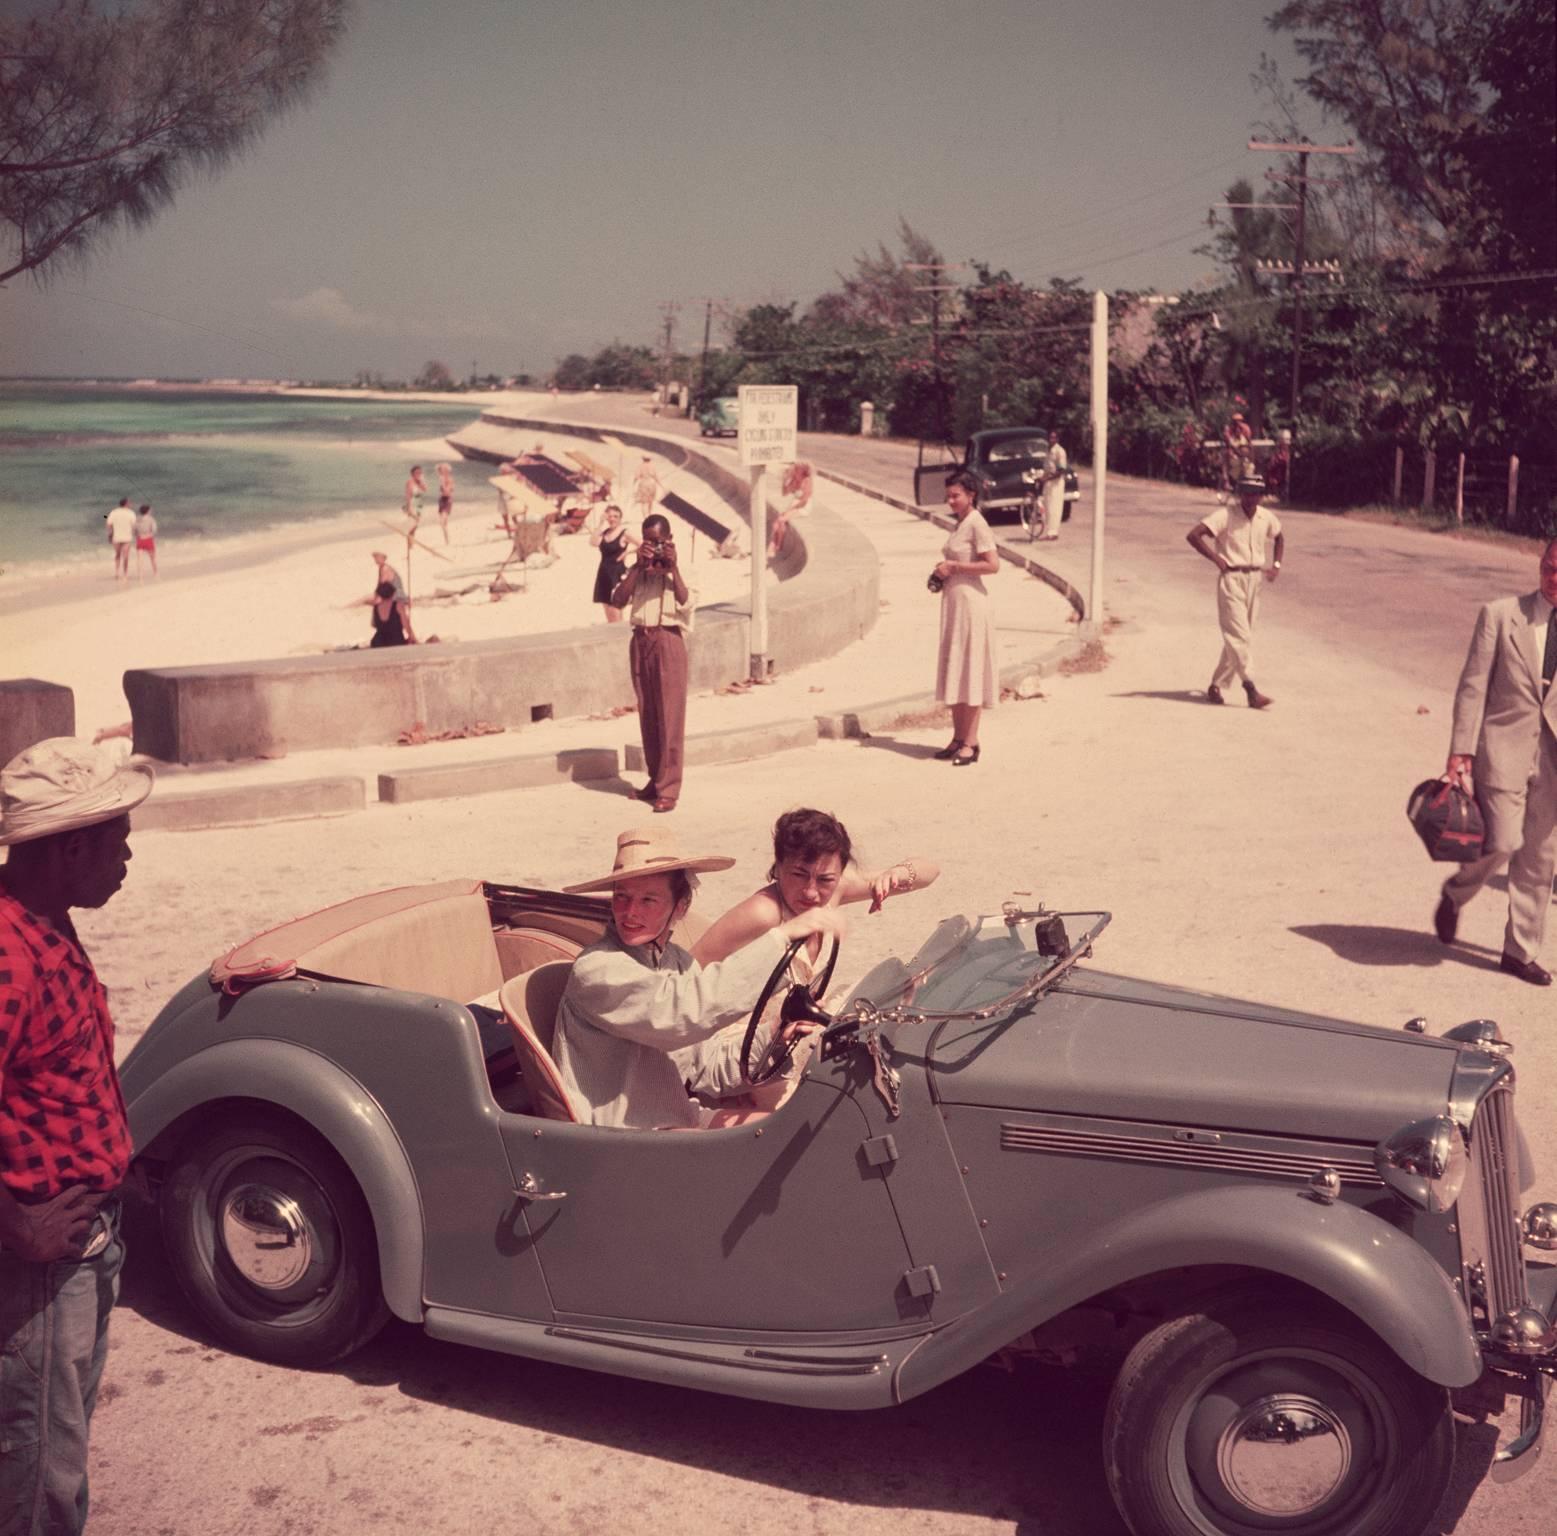 American film star Katharine Hepburn (1907 - 2003) driving along the waterfront with Irene Mayer Selznick at Montego Bay, Jamaica, 1953.

This gorgeous and vividly coloured 'Slim' photograph of beautiful film star Katharine Hepburn and producer and